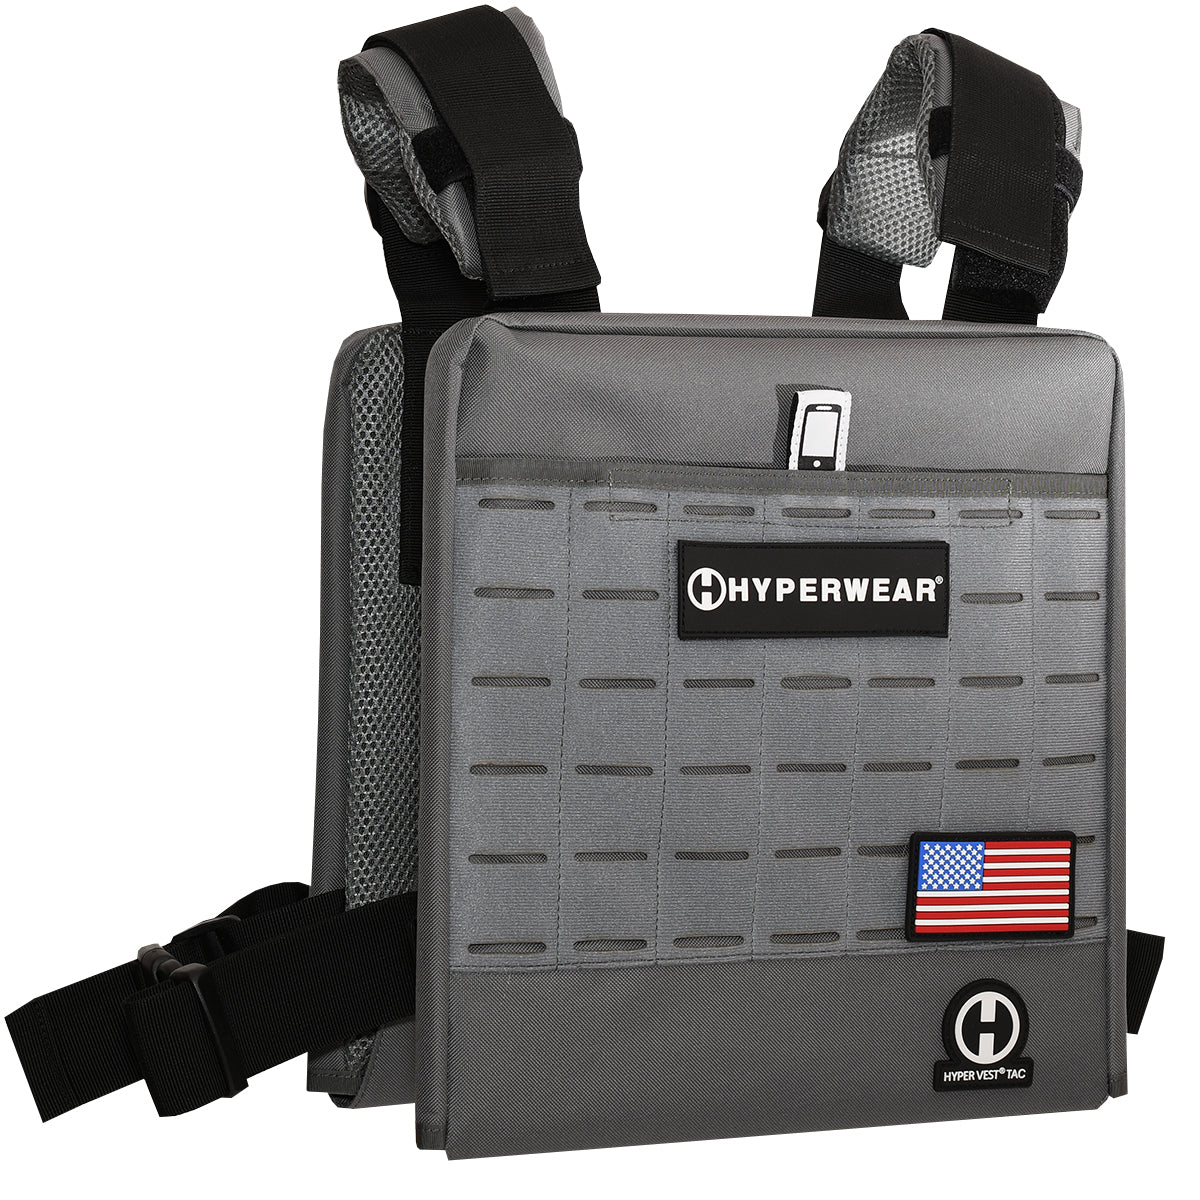 product photo of hyperwear tactical style weighted vest the Hyper Vest TAC